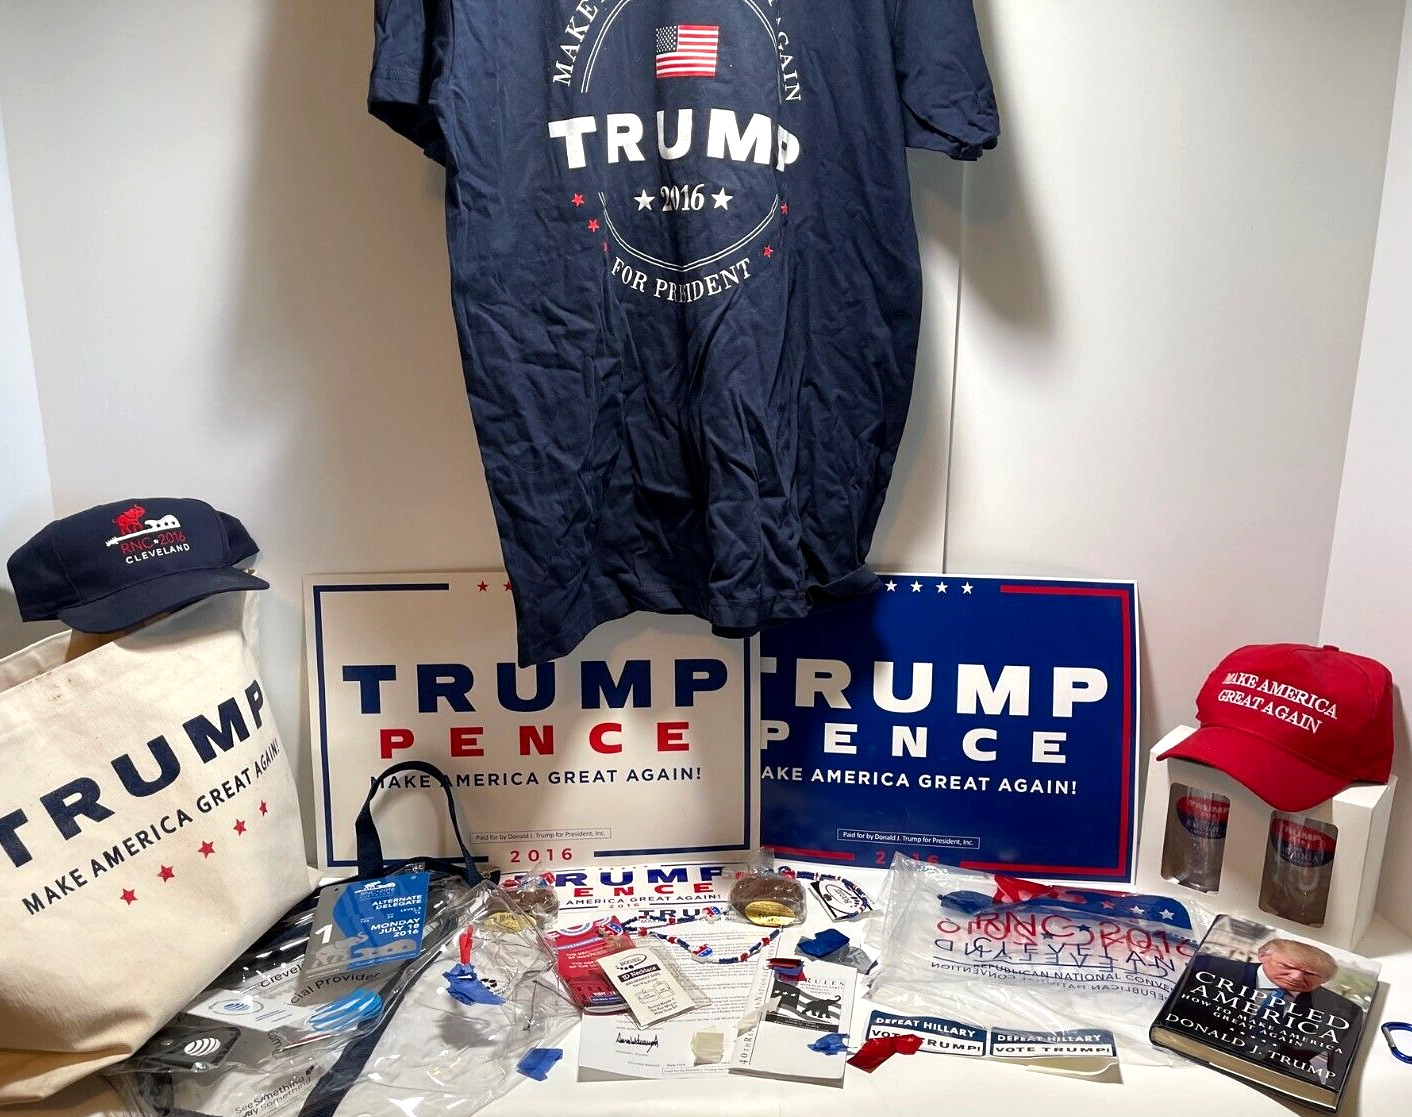 MAGA – Lot of AMAZING GOP/Trump Souvenirs from the 2016 RNC Convention